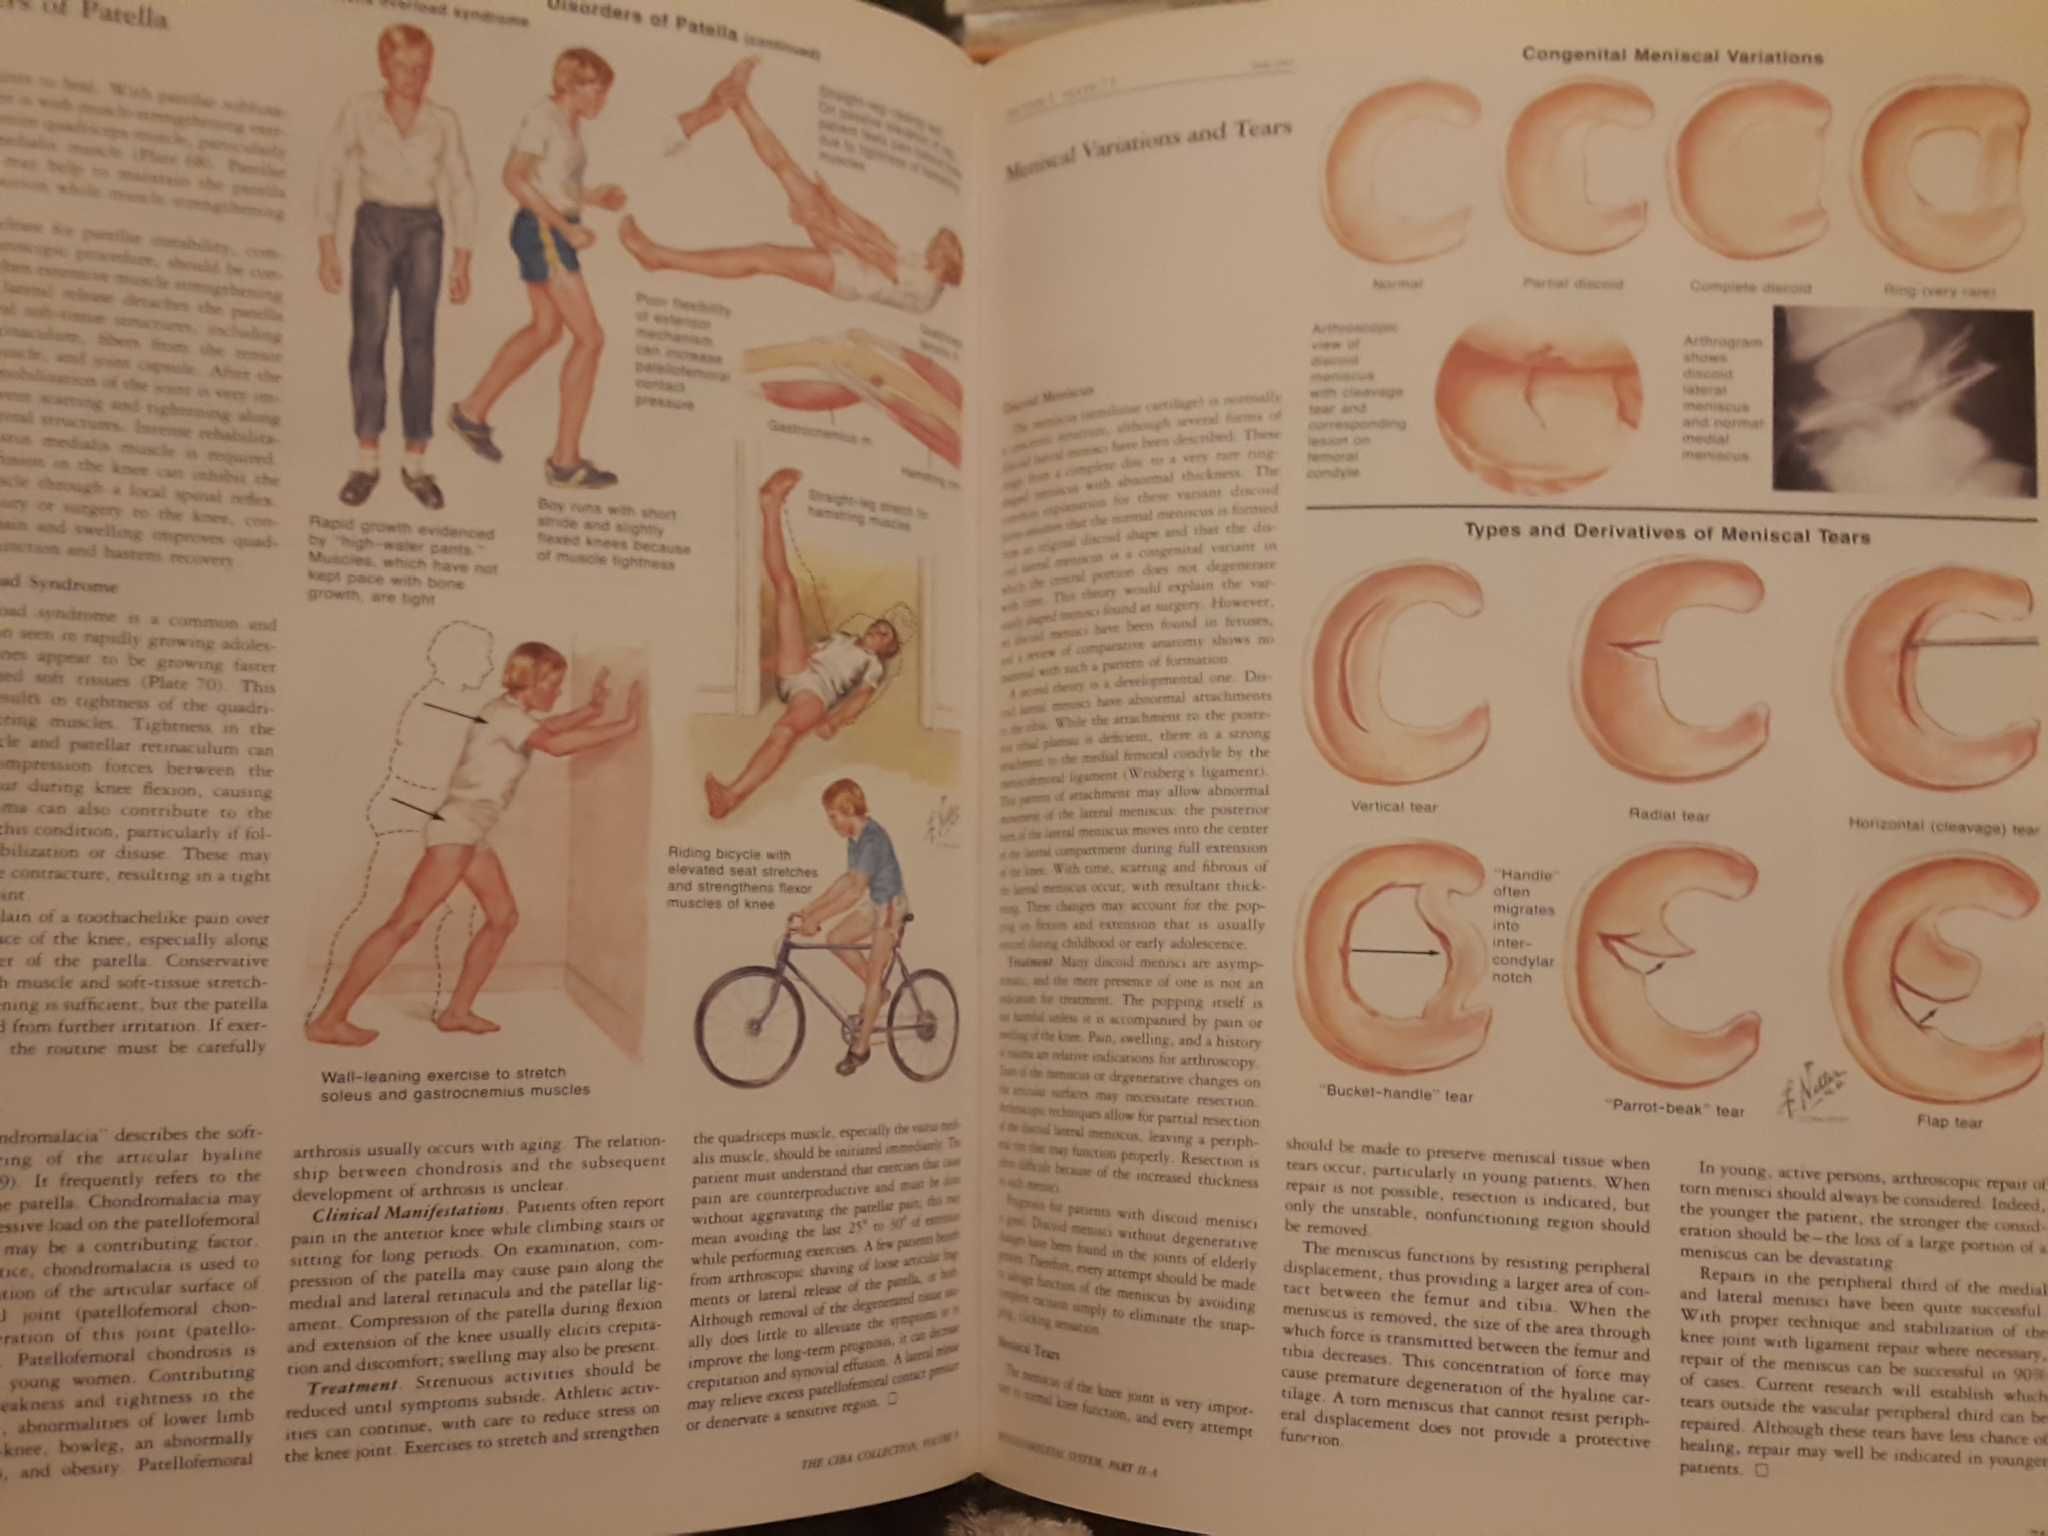 Ciba Collection of Medical Illustration - 8. Musculoskeletal System